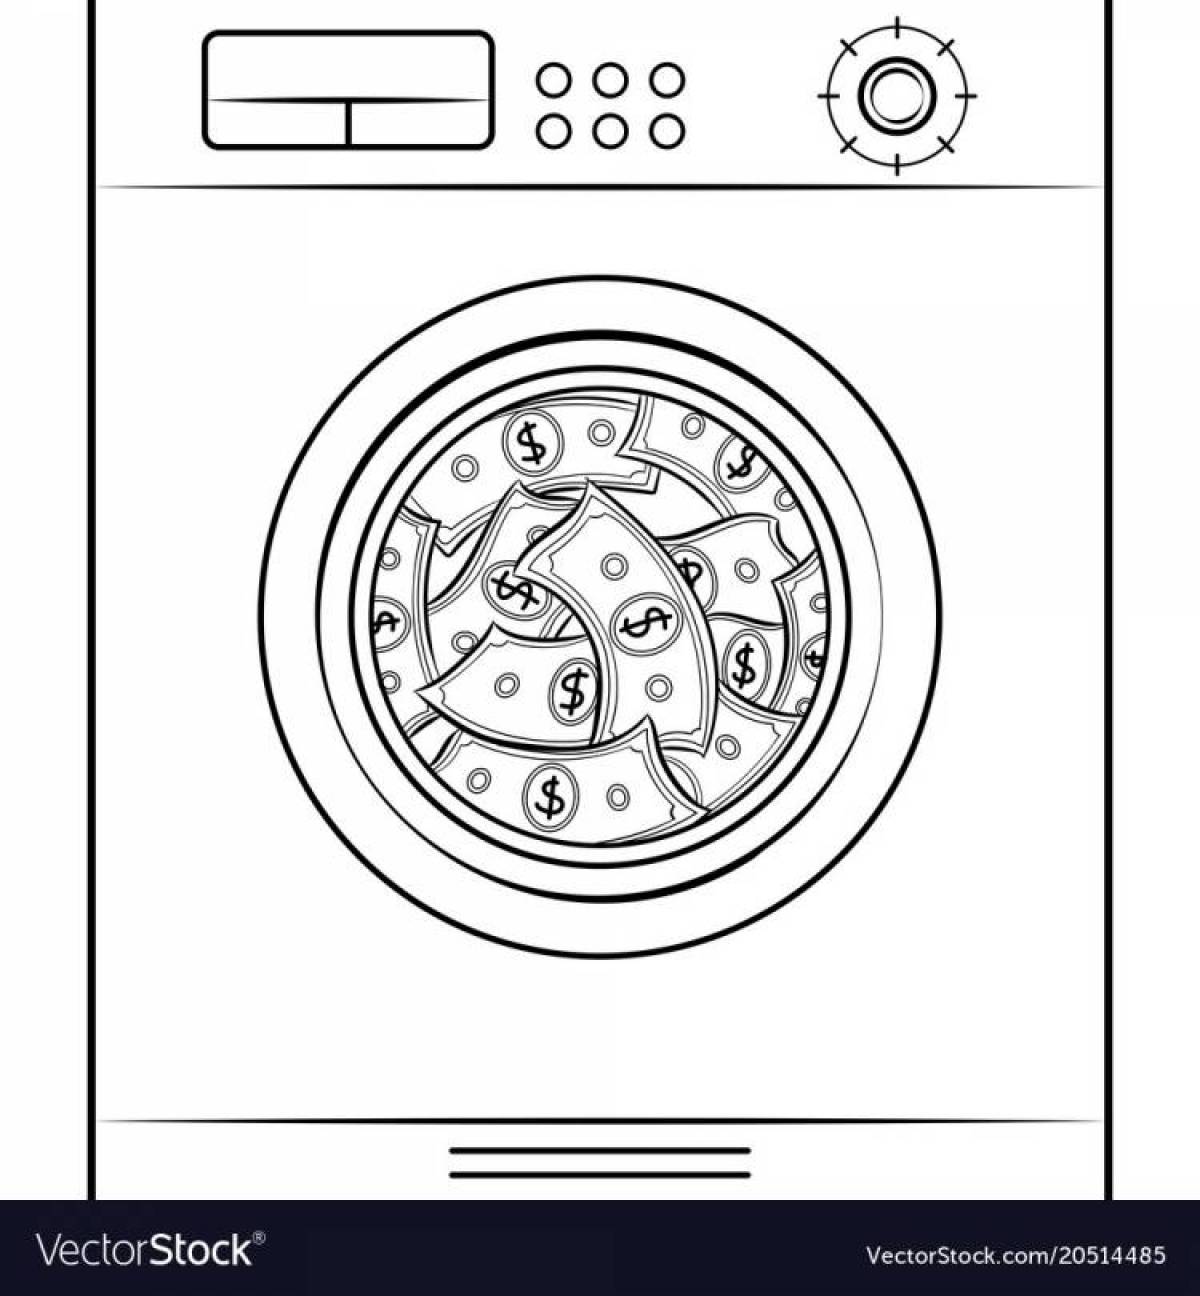 Coloring page of a washing machine